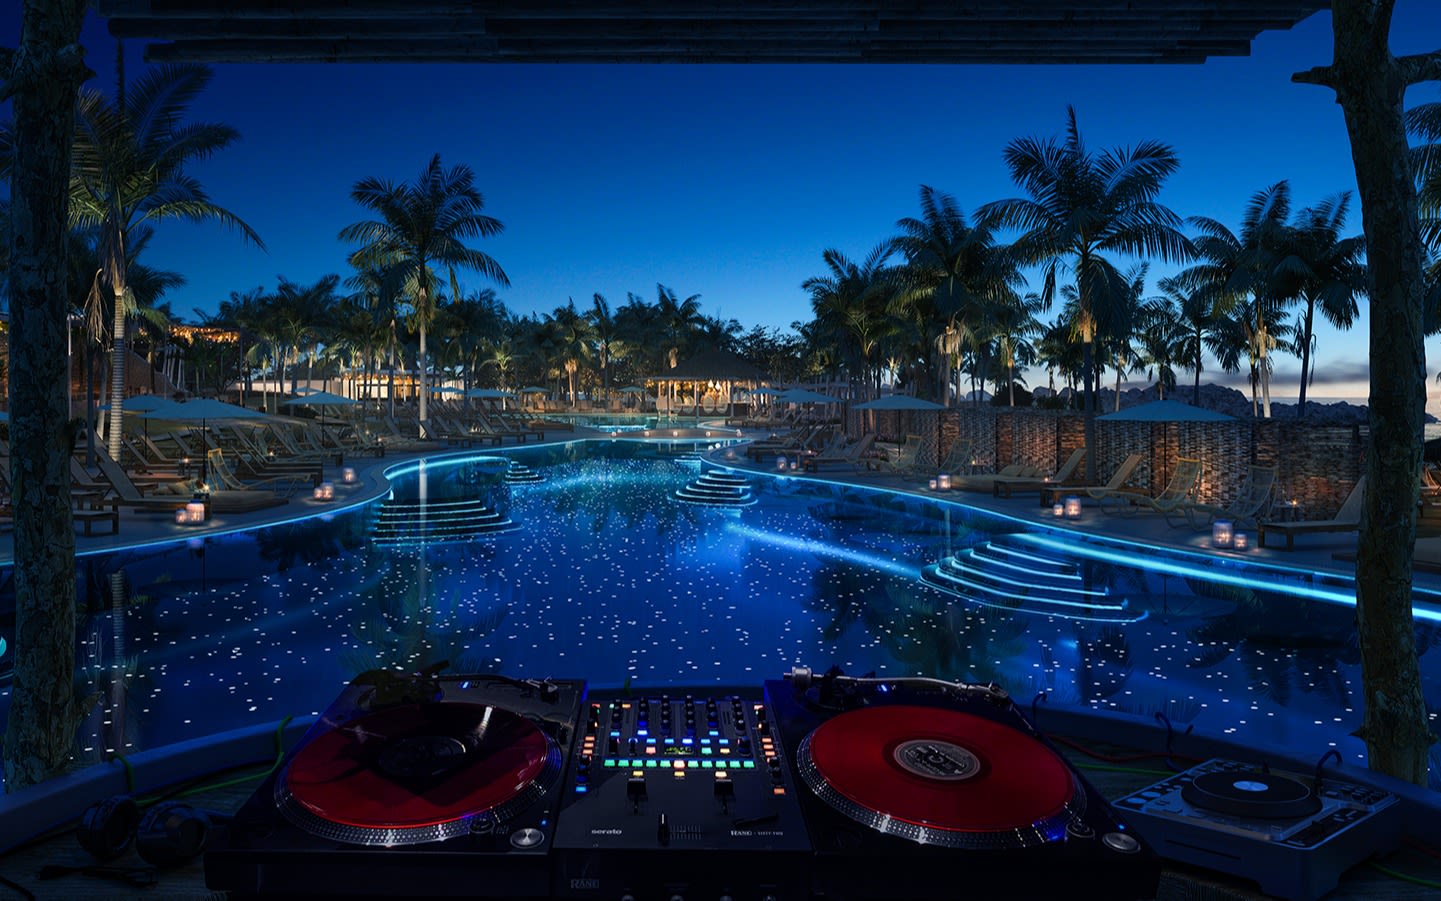 A view looking out to the pool area from the DJ booth at the Beach Club Bimini